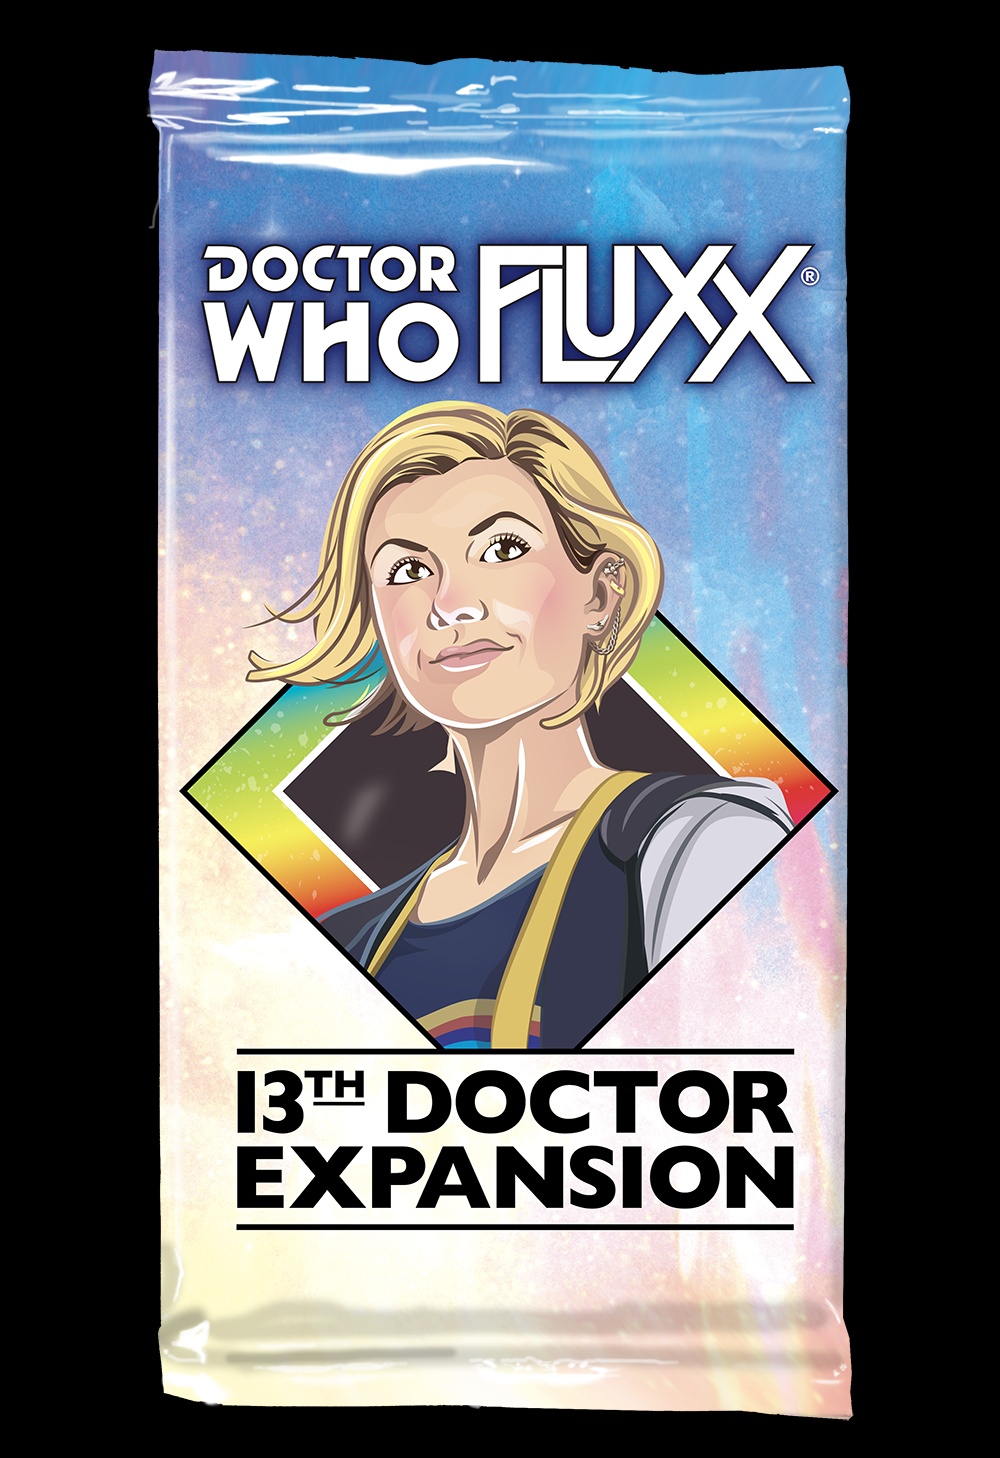 13th Doctor Expansion for Doctor Who Fluxx